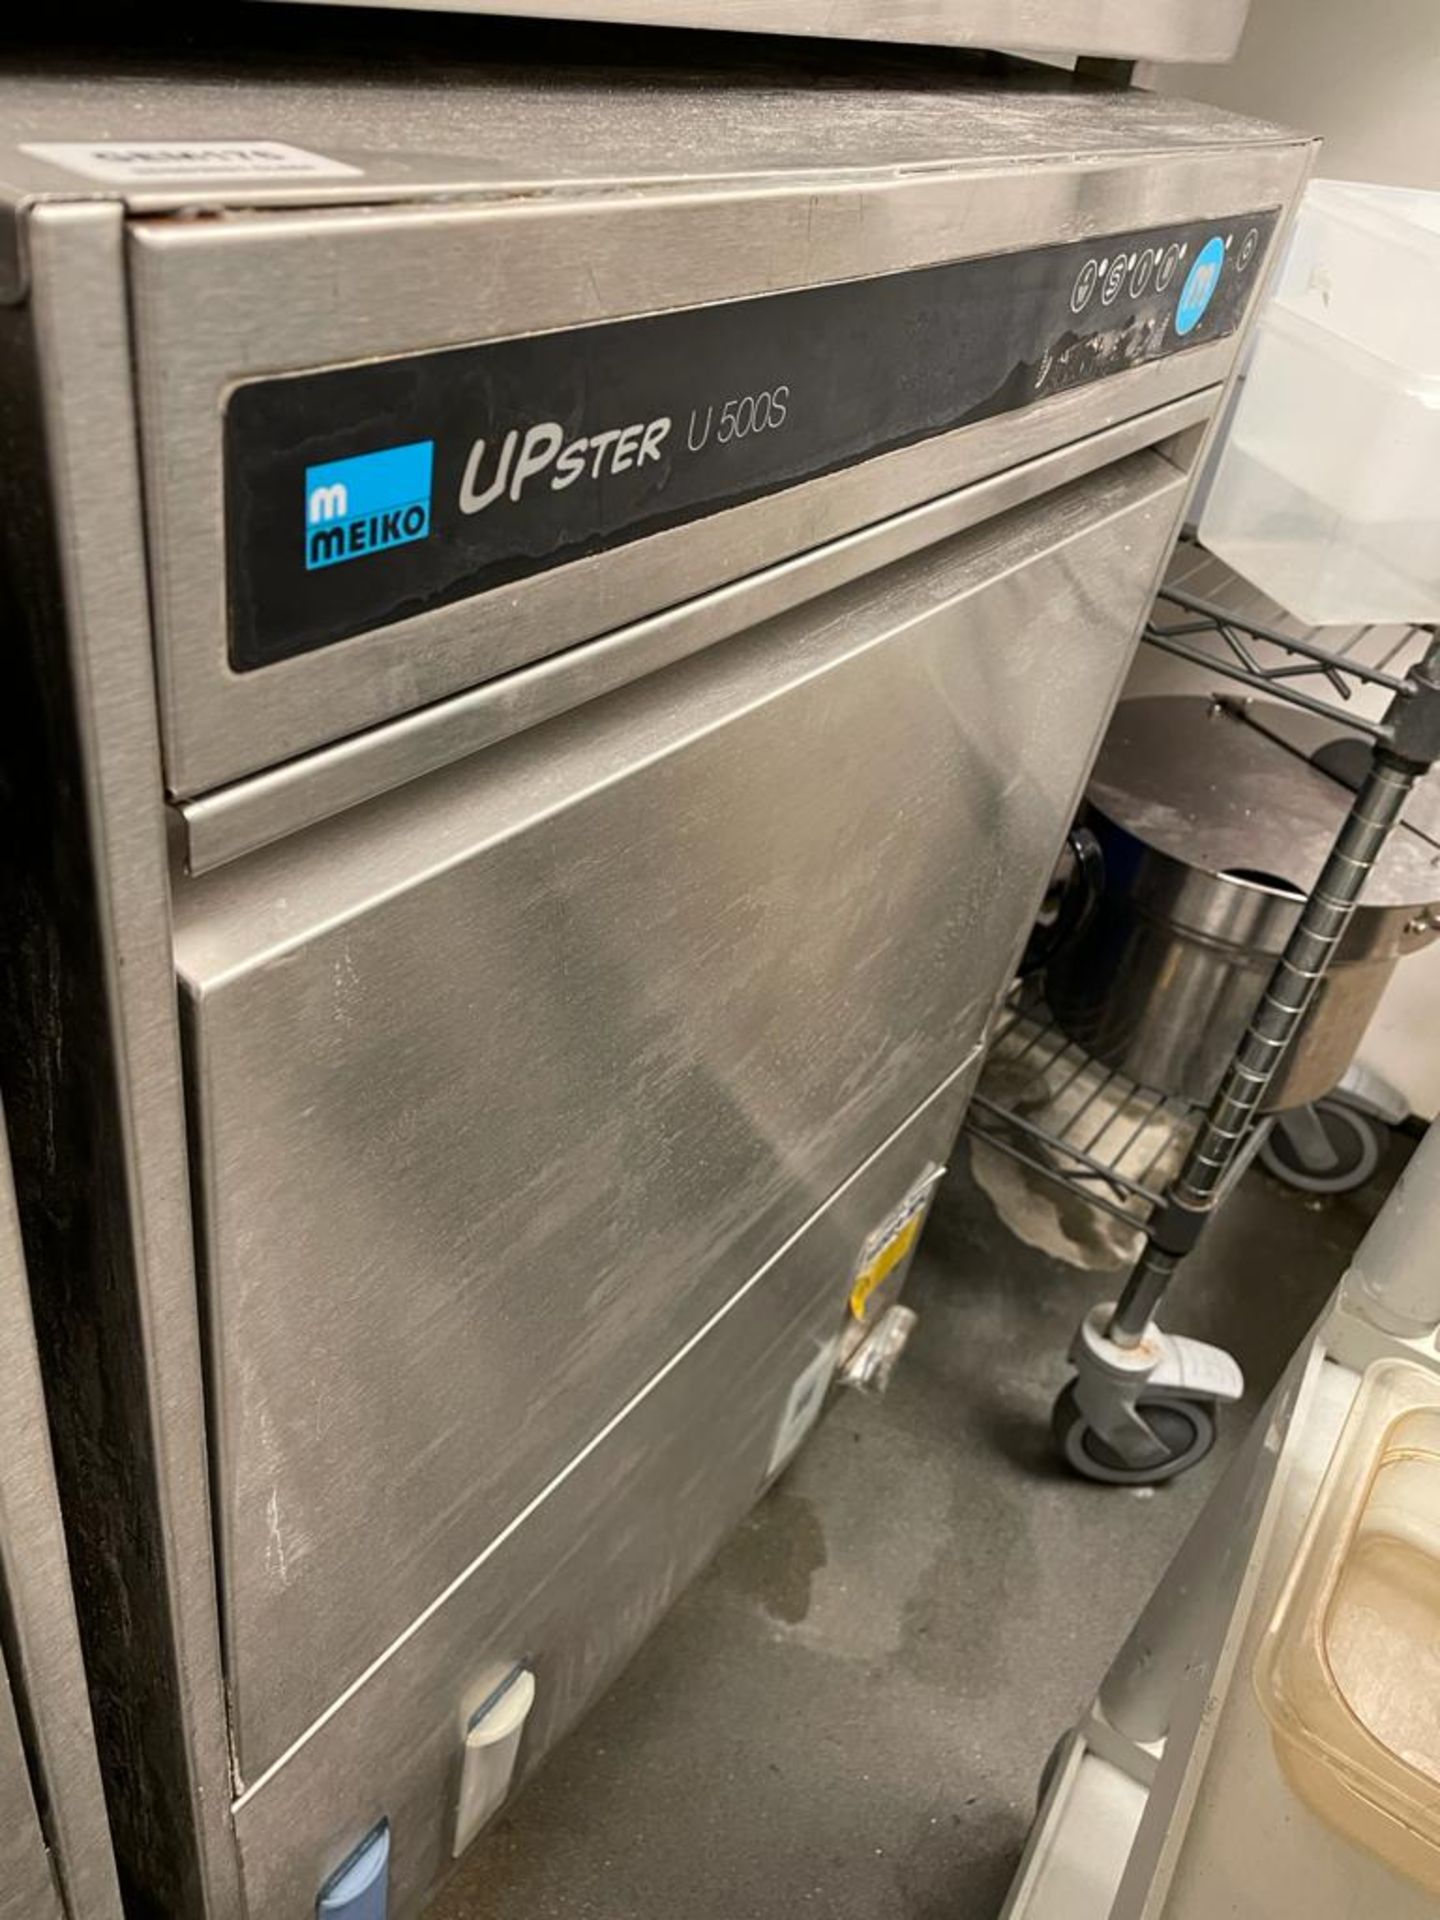 1 x Meiko UPster U 500S Commercial Undercounter Pot Washer With Stainless Steel Exterior - CL670 - - Image 3 of 4